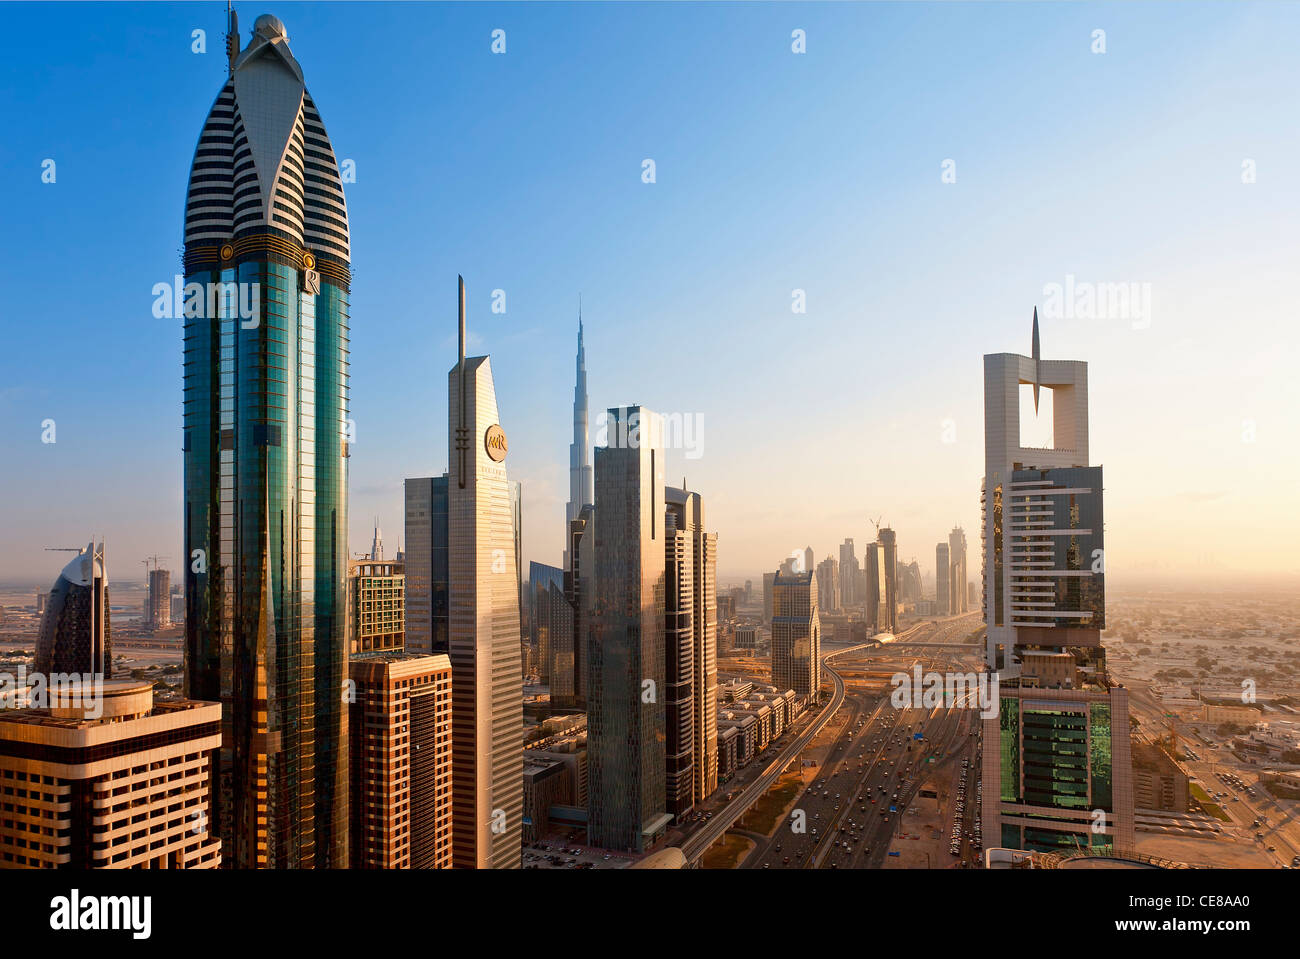 Dubai, Towering office and apartment towers along Sheikh Zayed Road Stock Photo